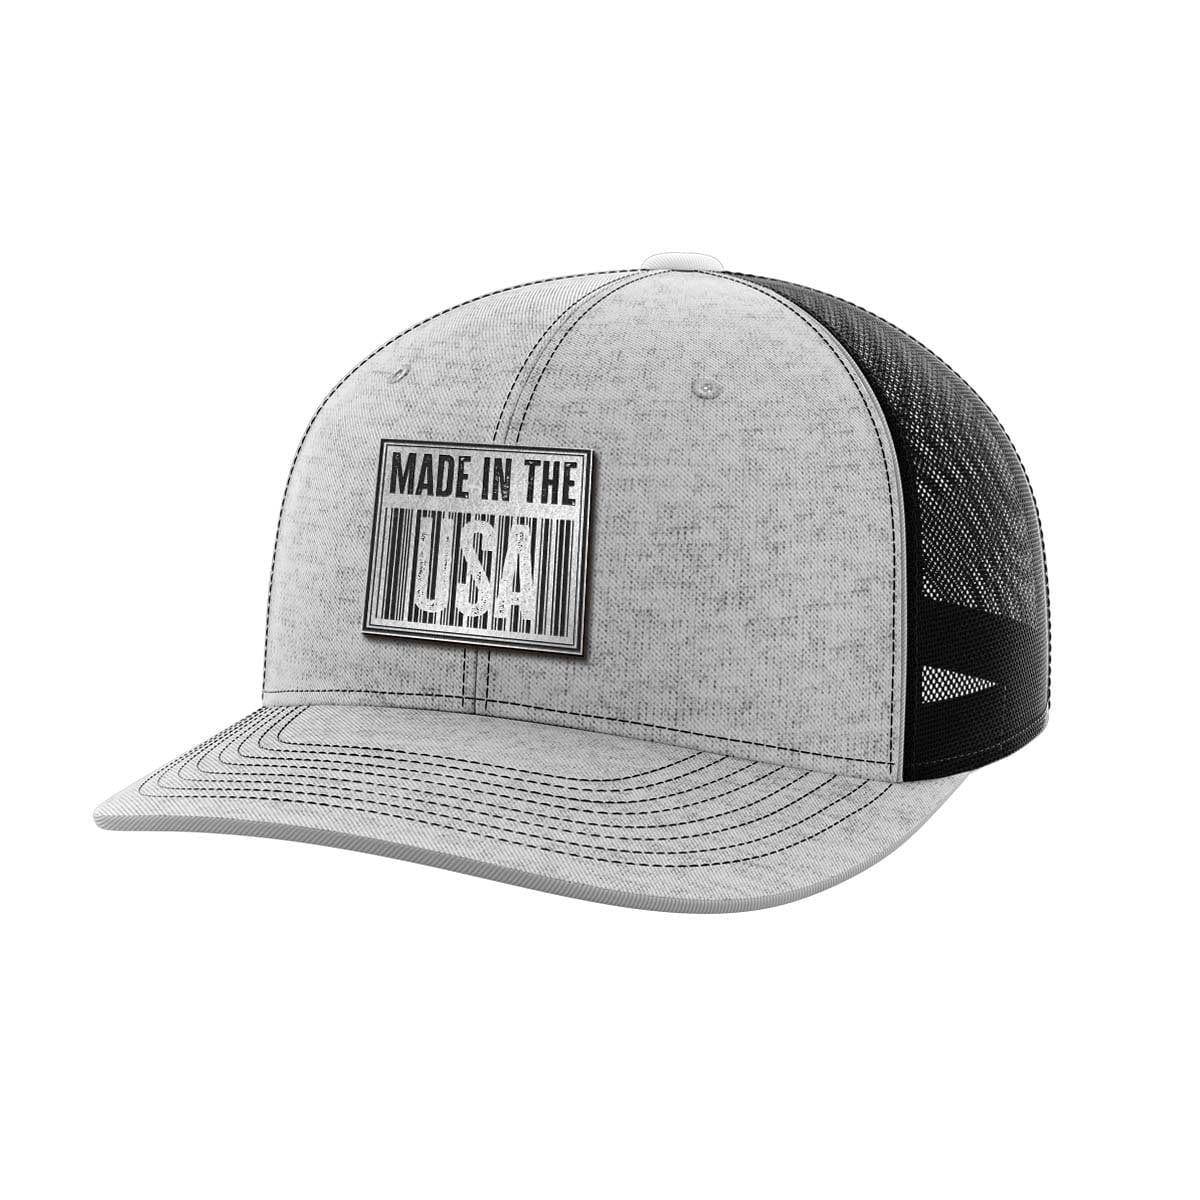 Thumbnail for Made In The USA Black Patch Hat - Greater Half